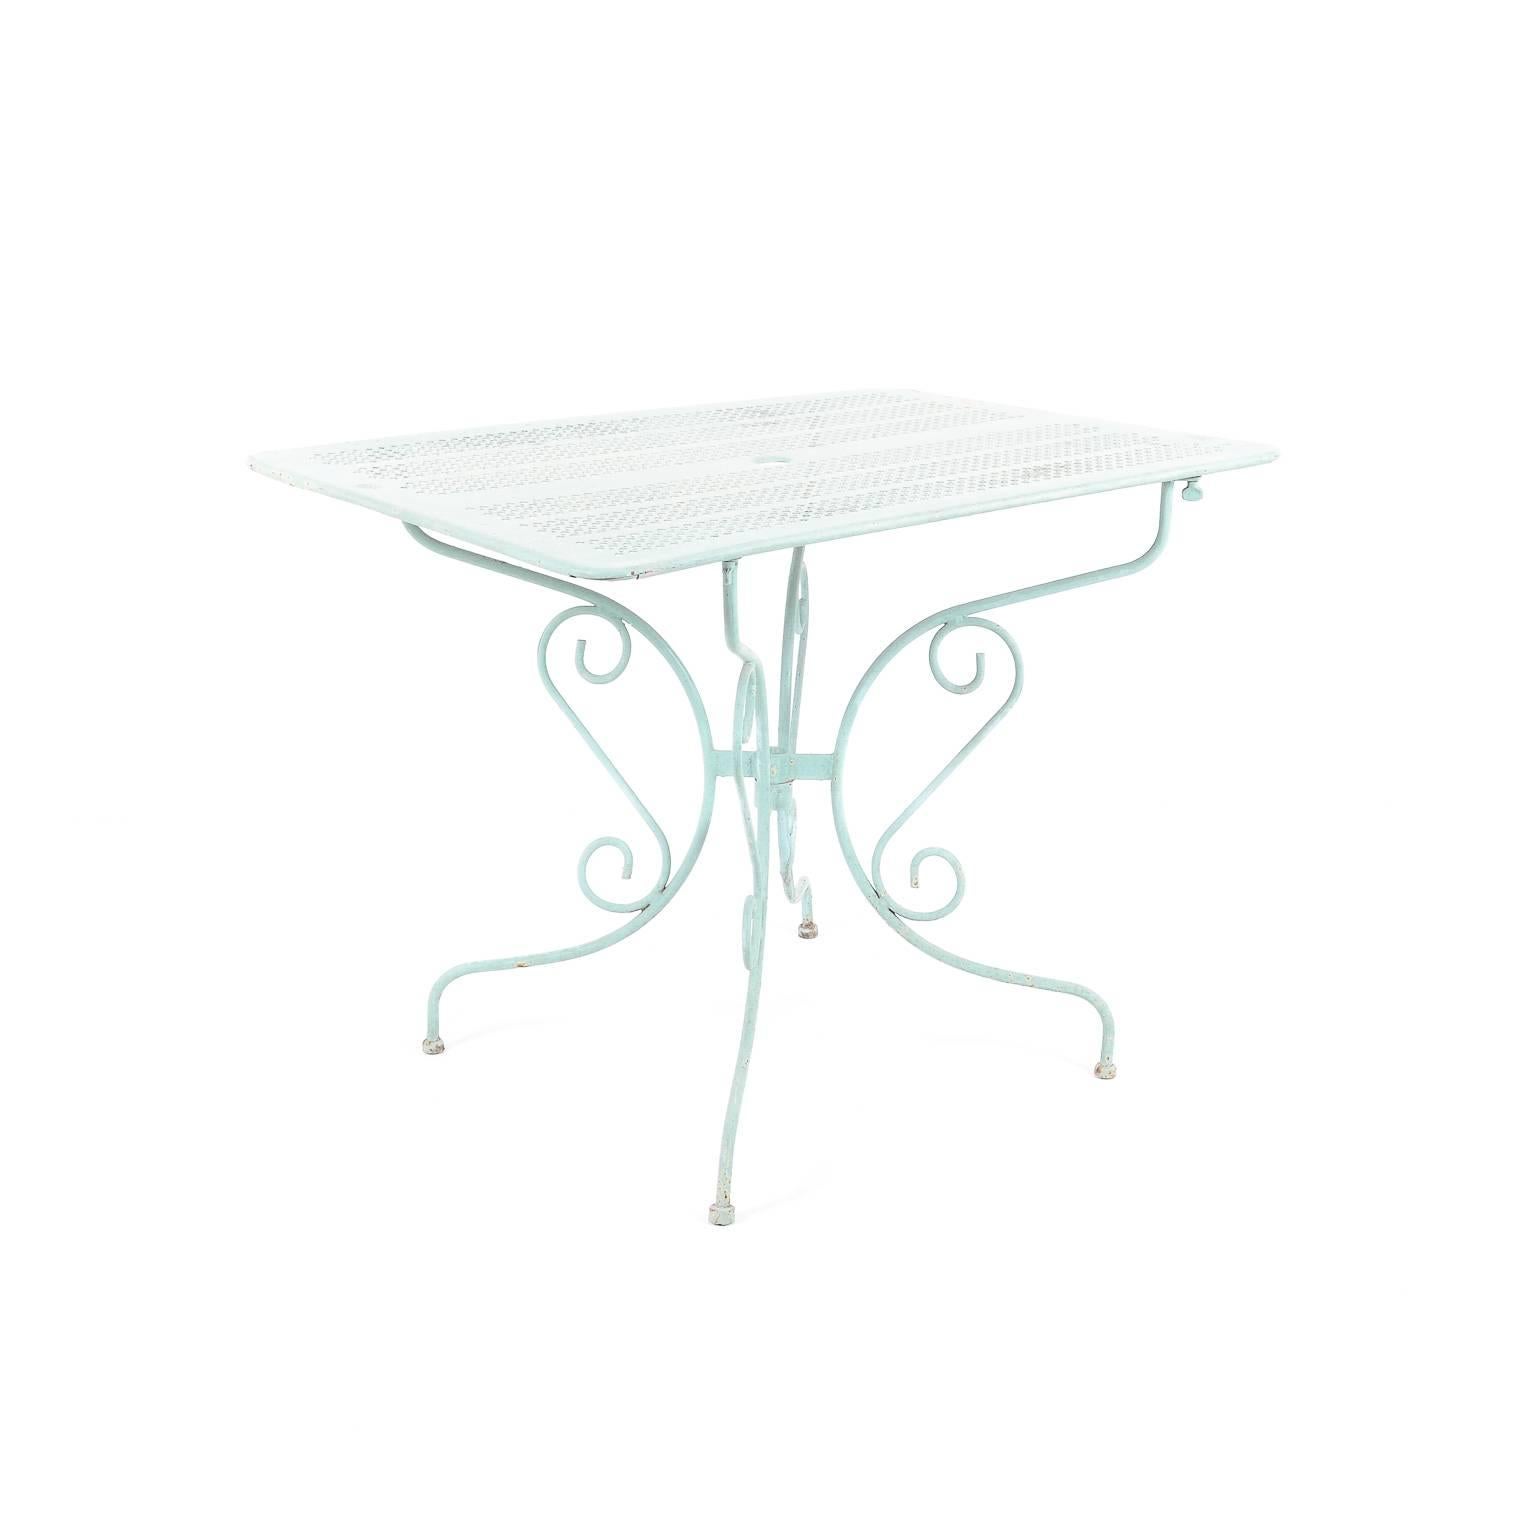 Lovely color on this beautiful patio table from France, circa 1920.